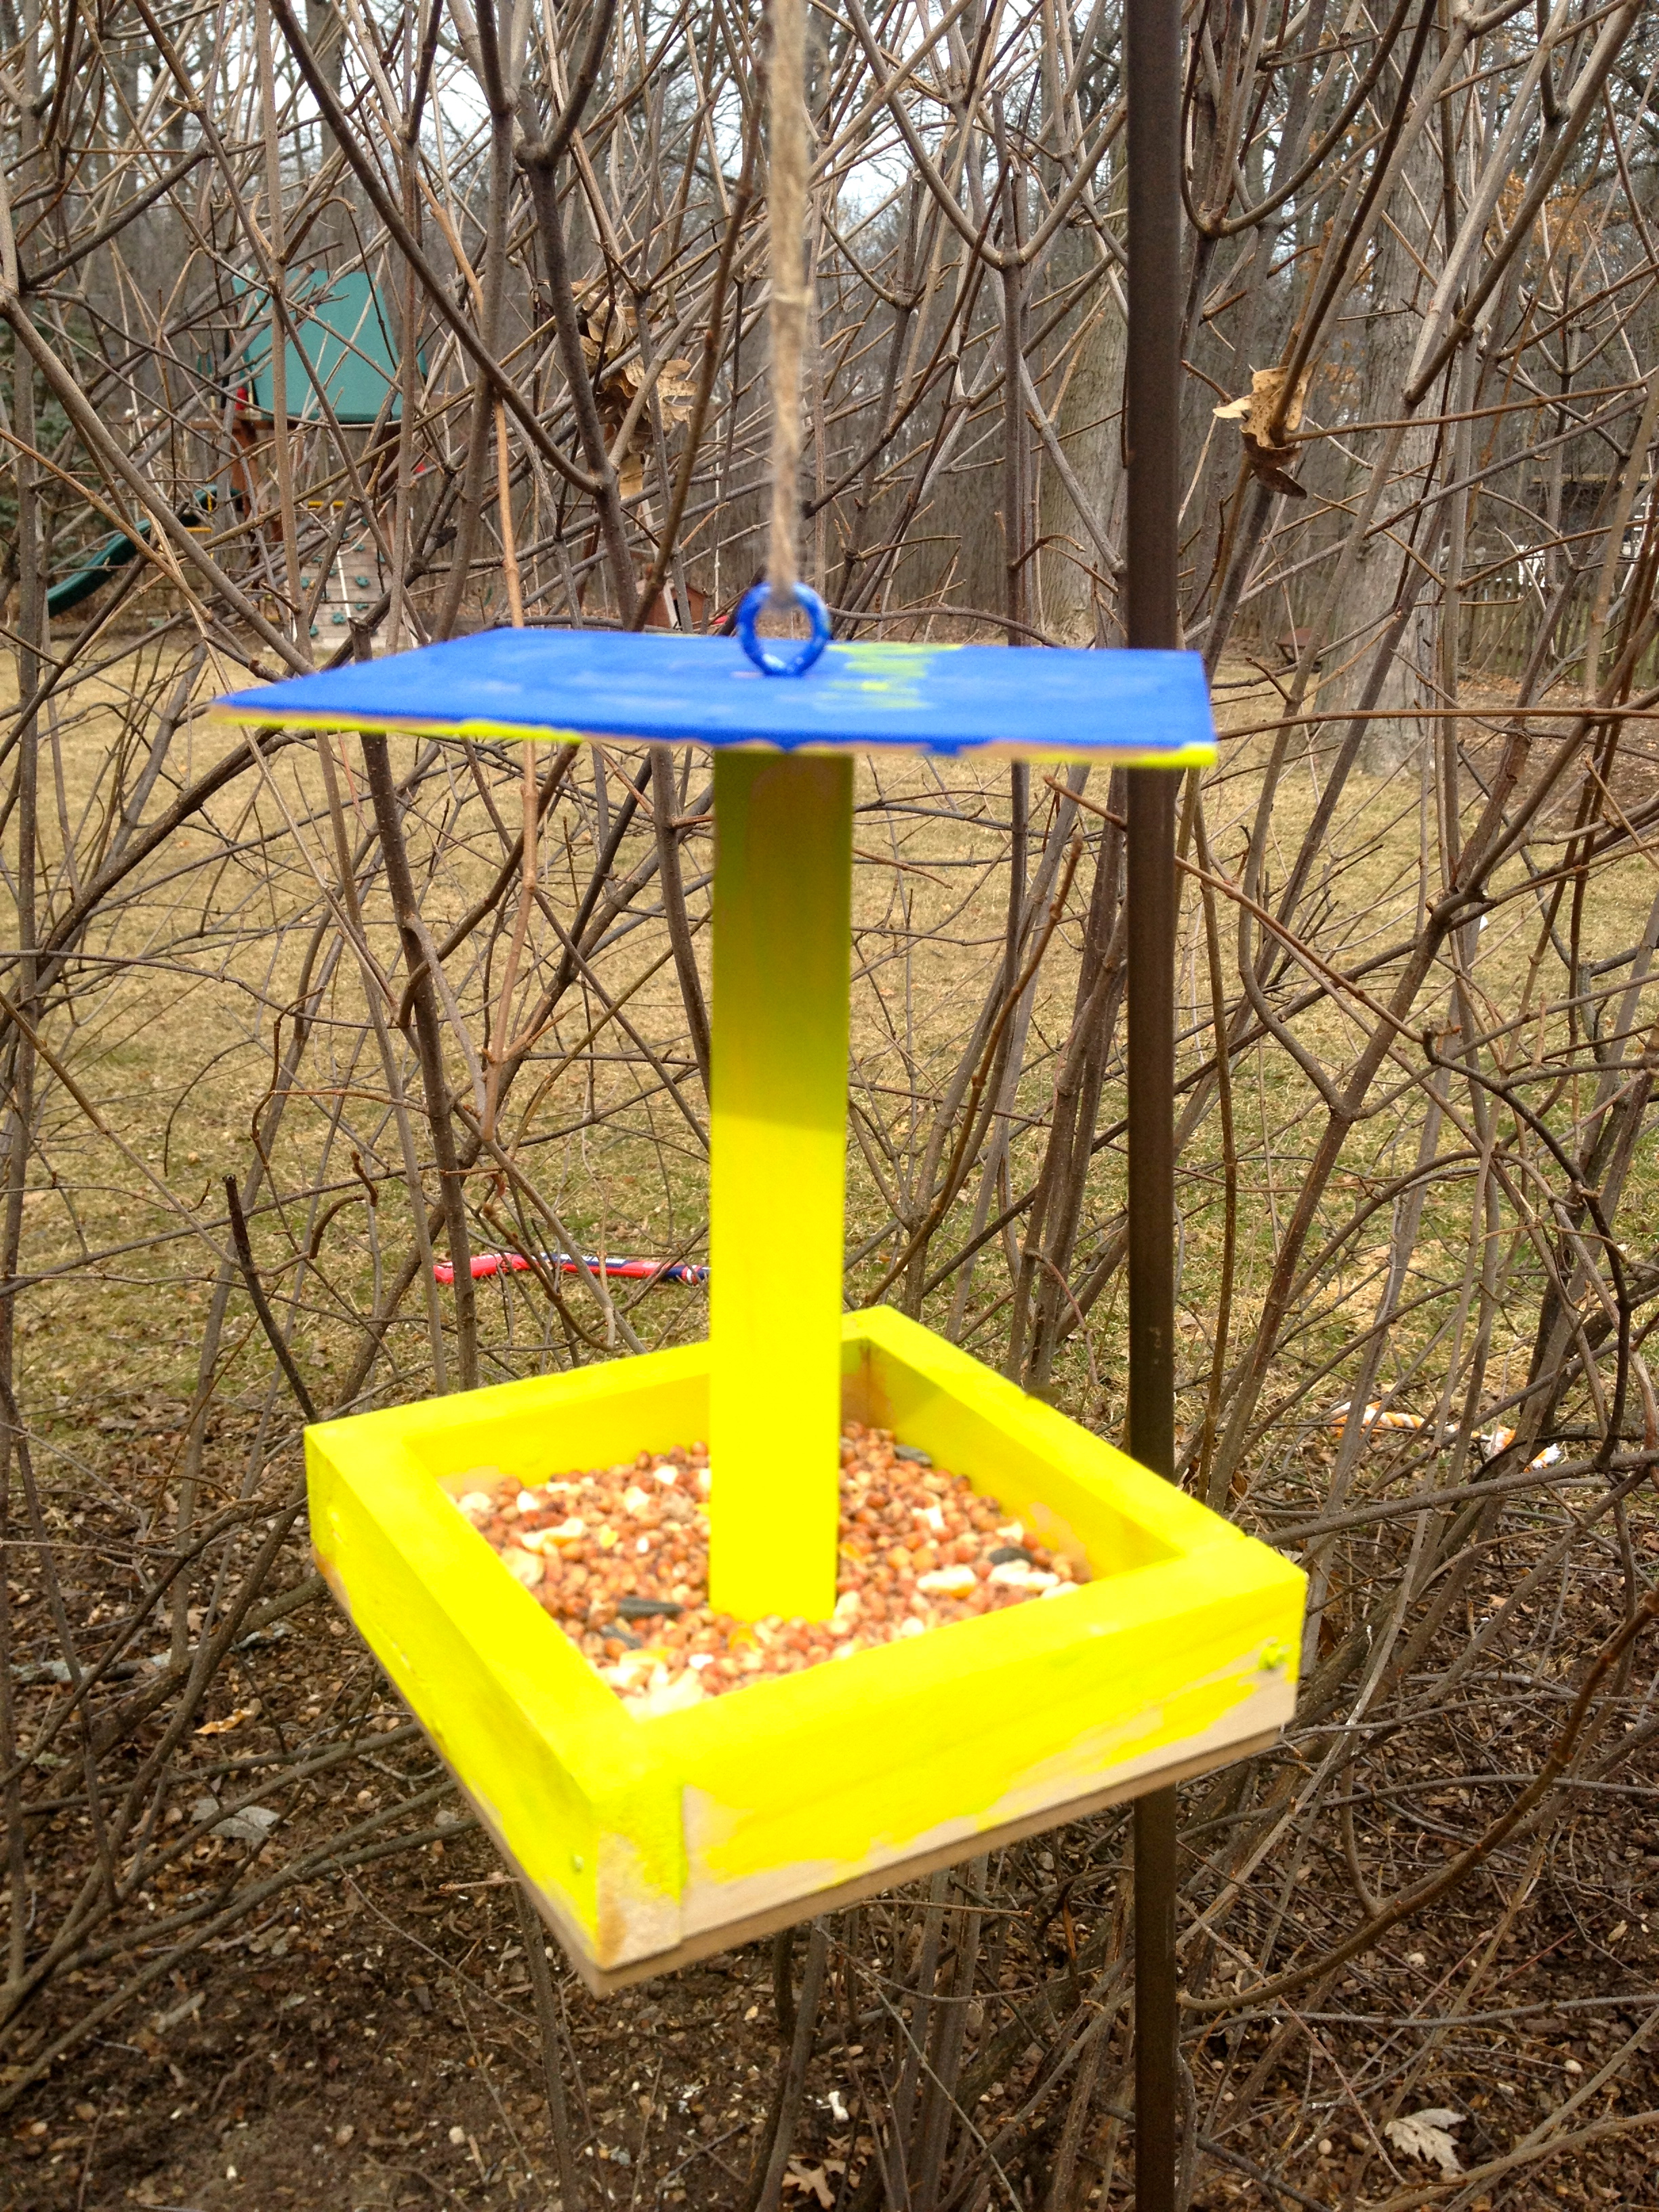 Vman's Finished Product: A Bird Feeder.